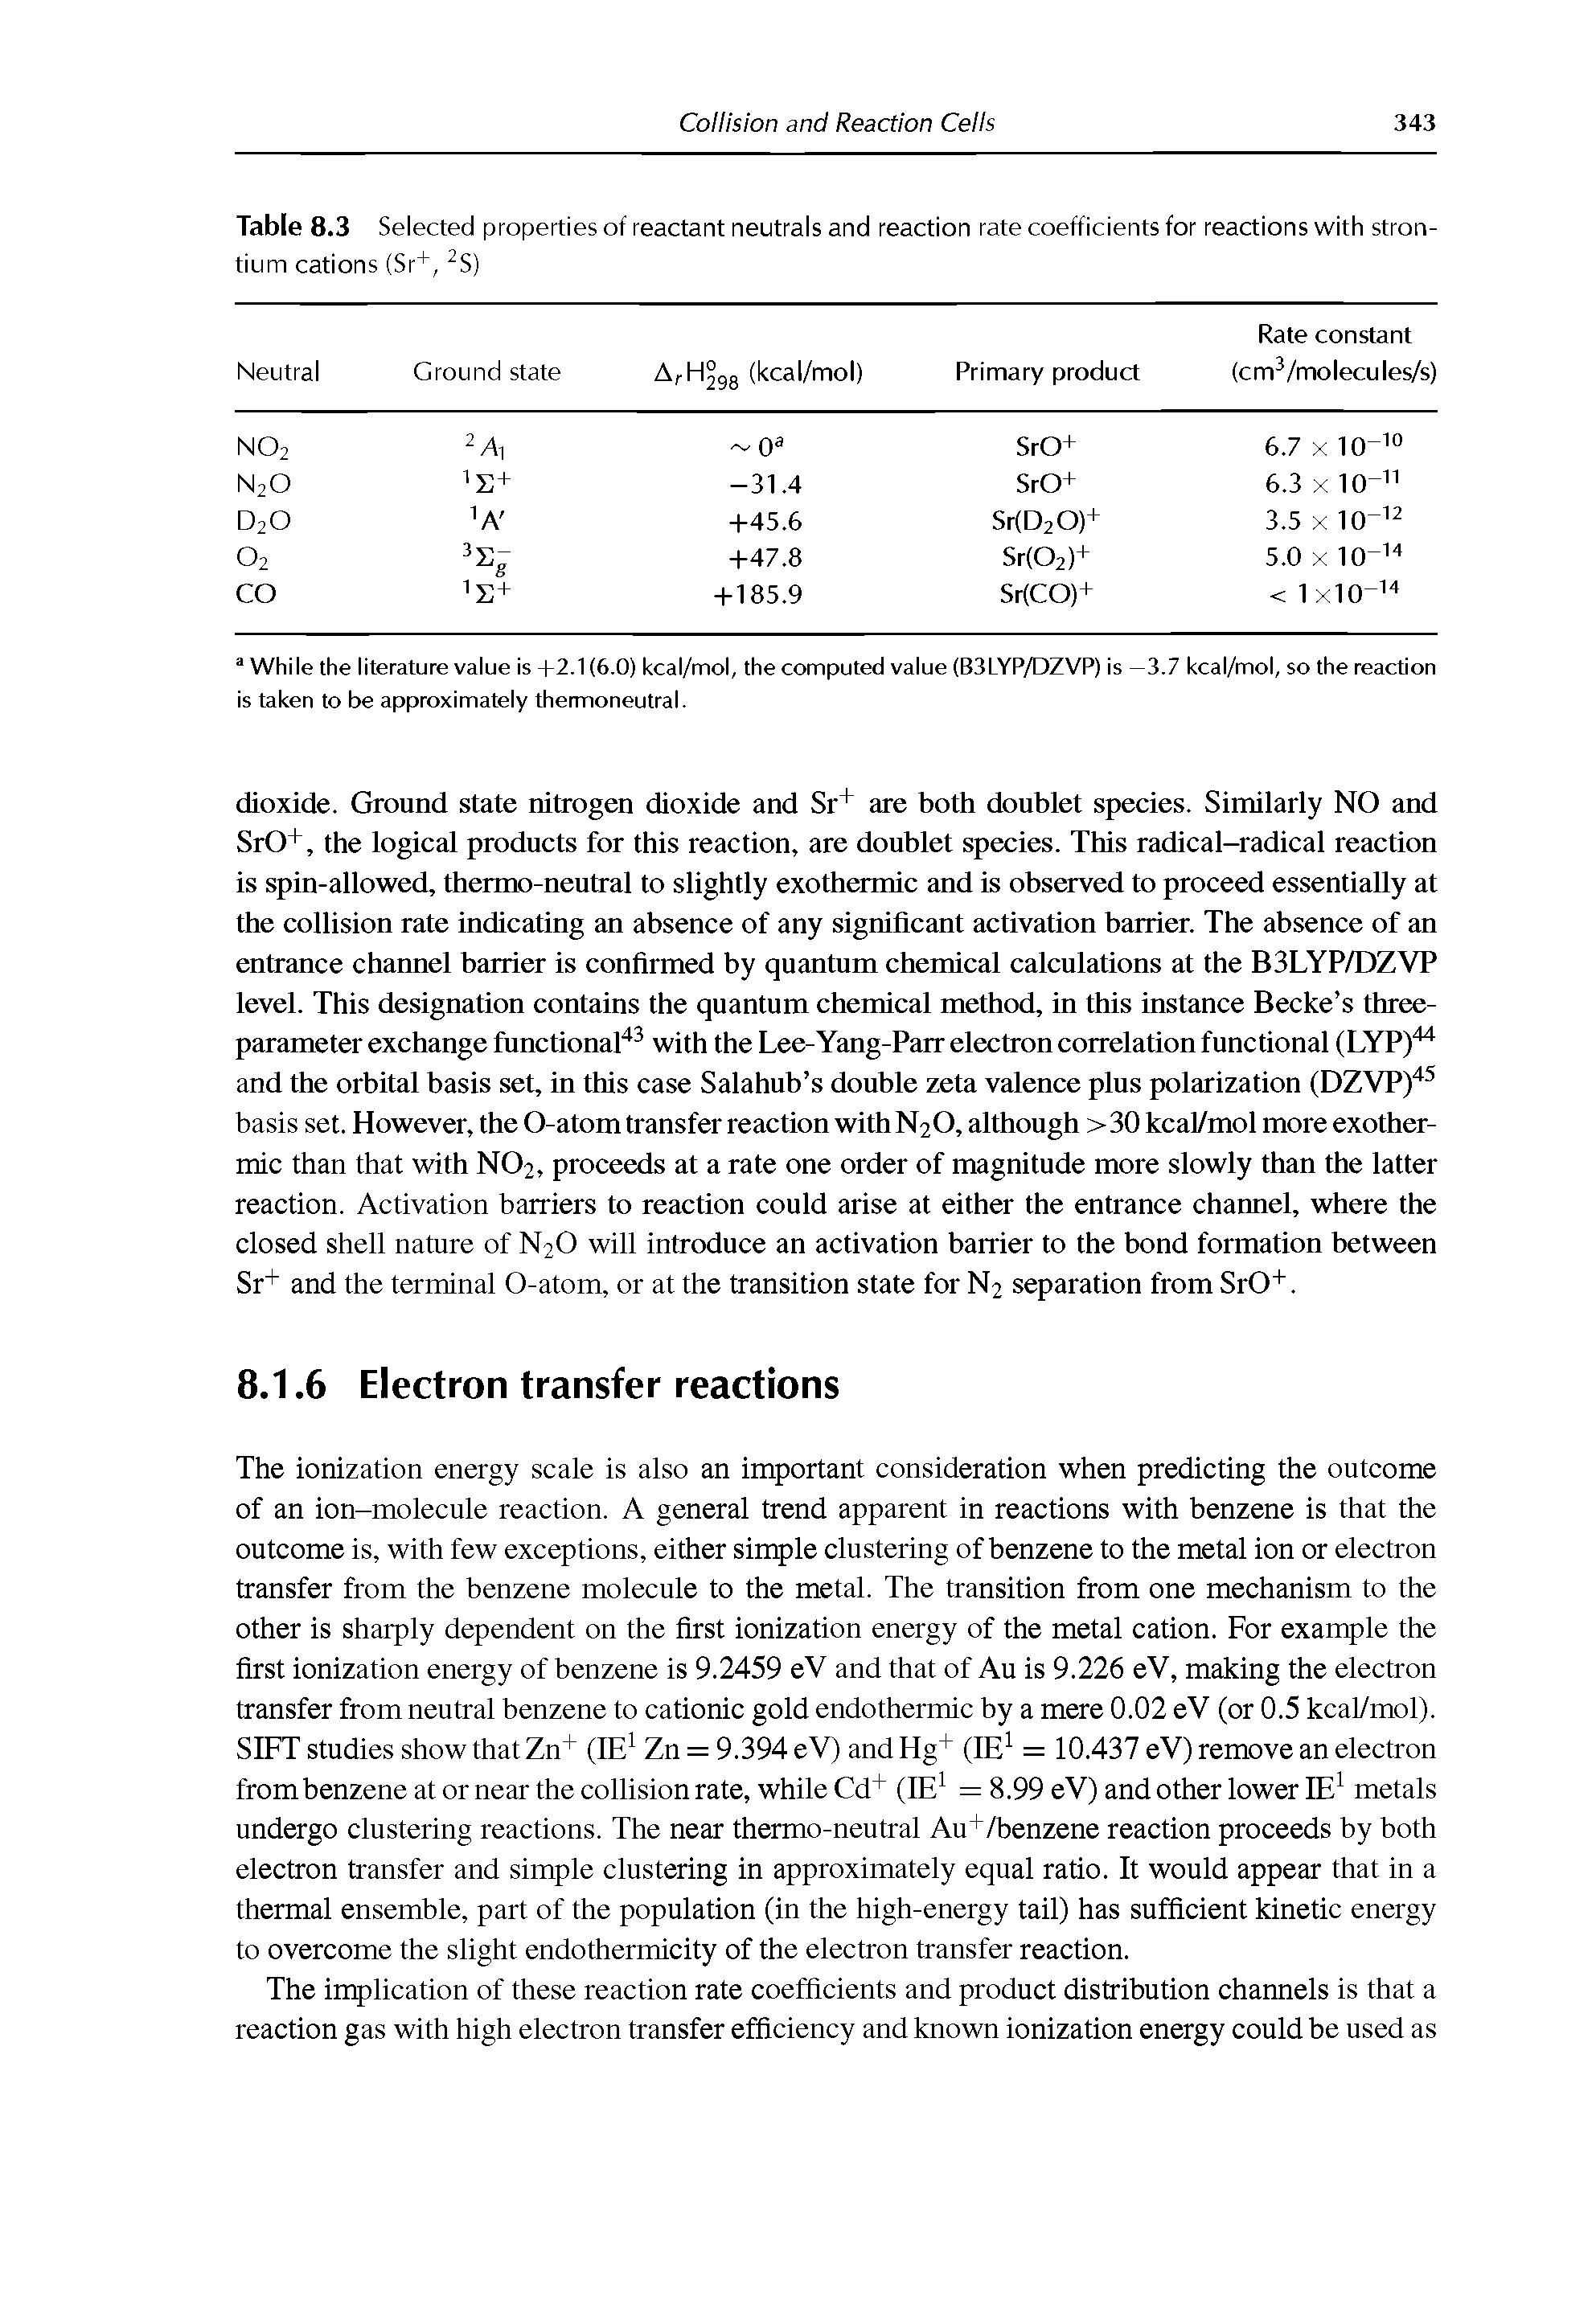 Table 8.3 Selected properties of reactant neutrals and reaction rate coefficients for reactions with strontium cations (Sr+, S) ...